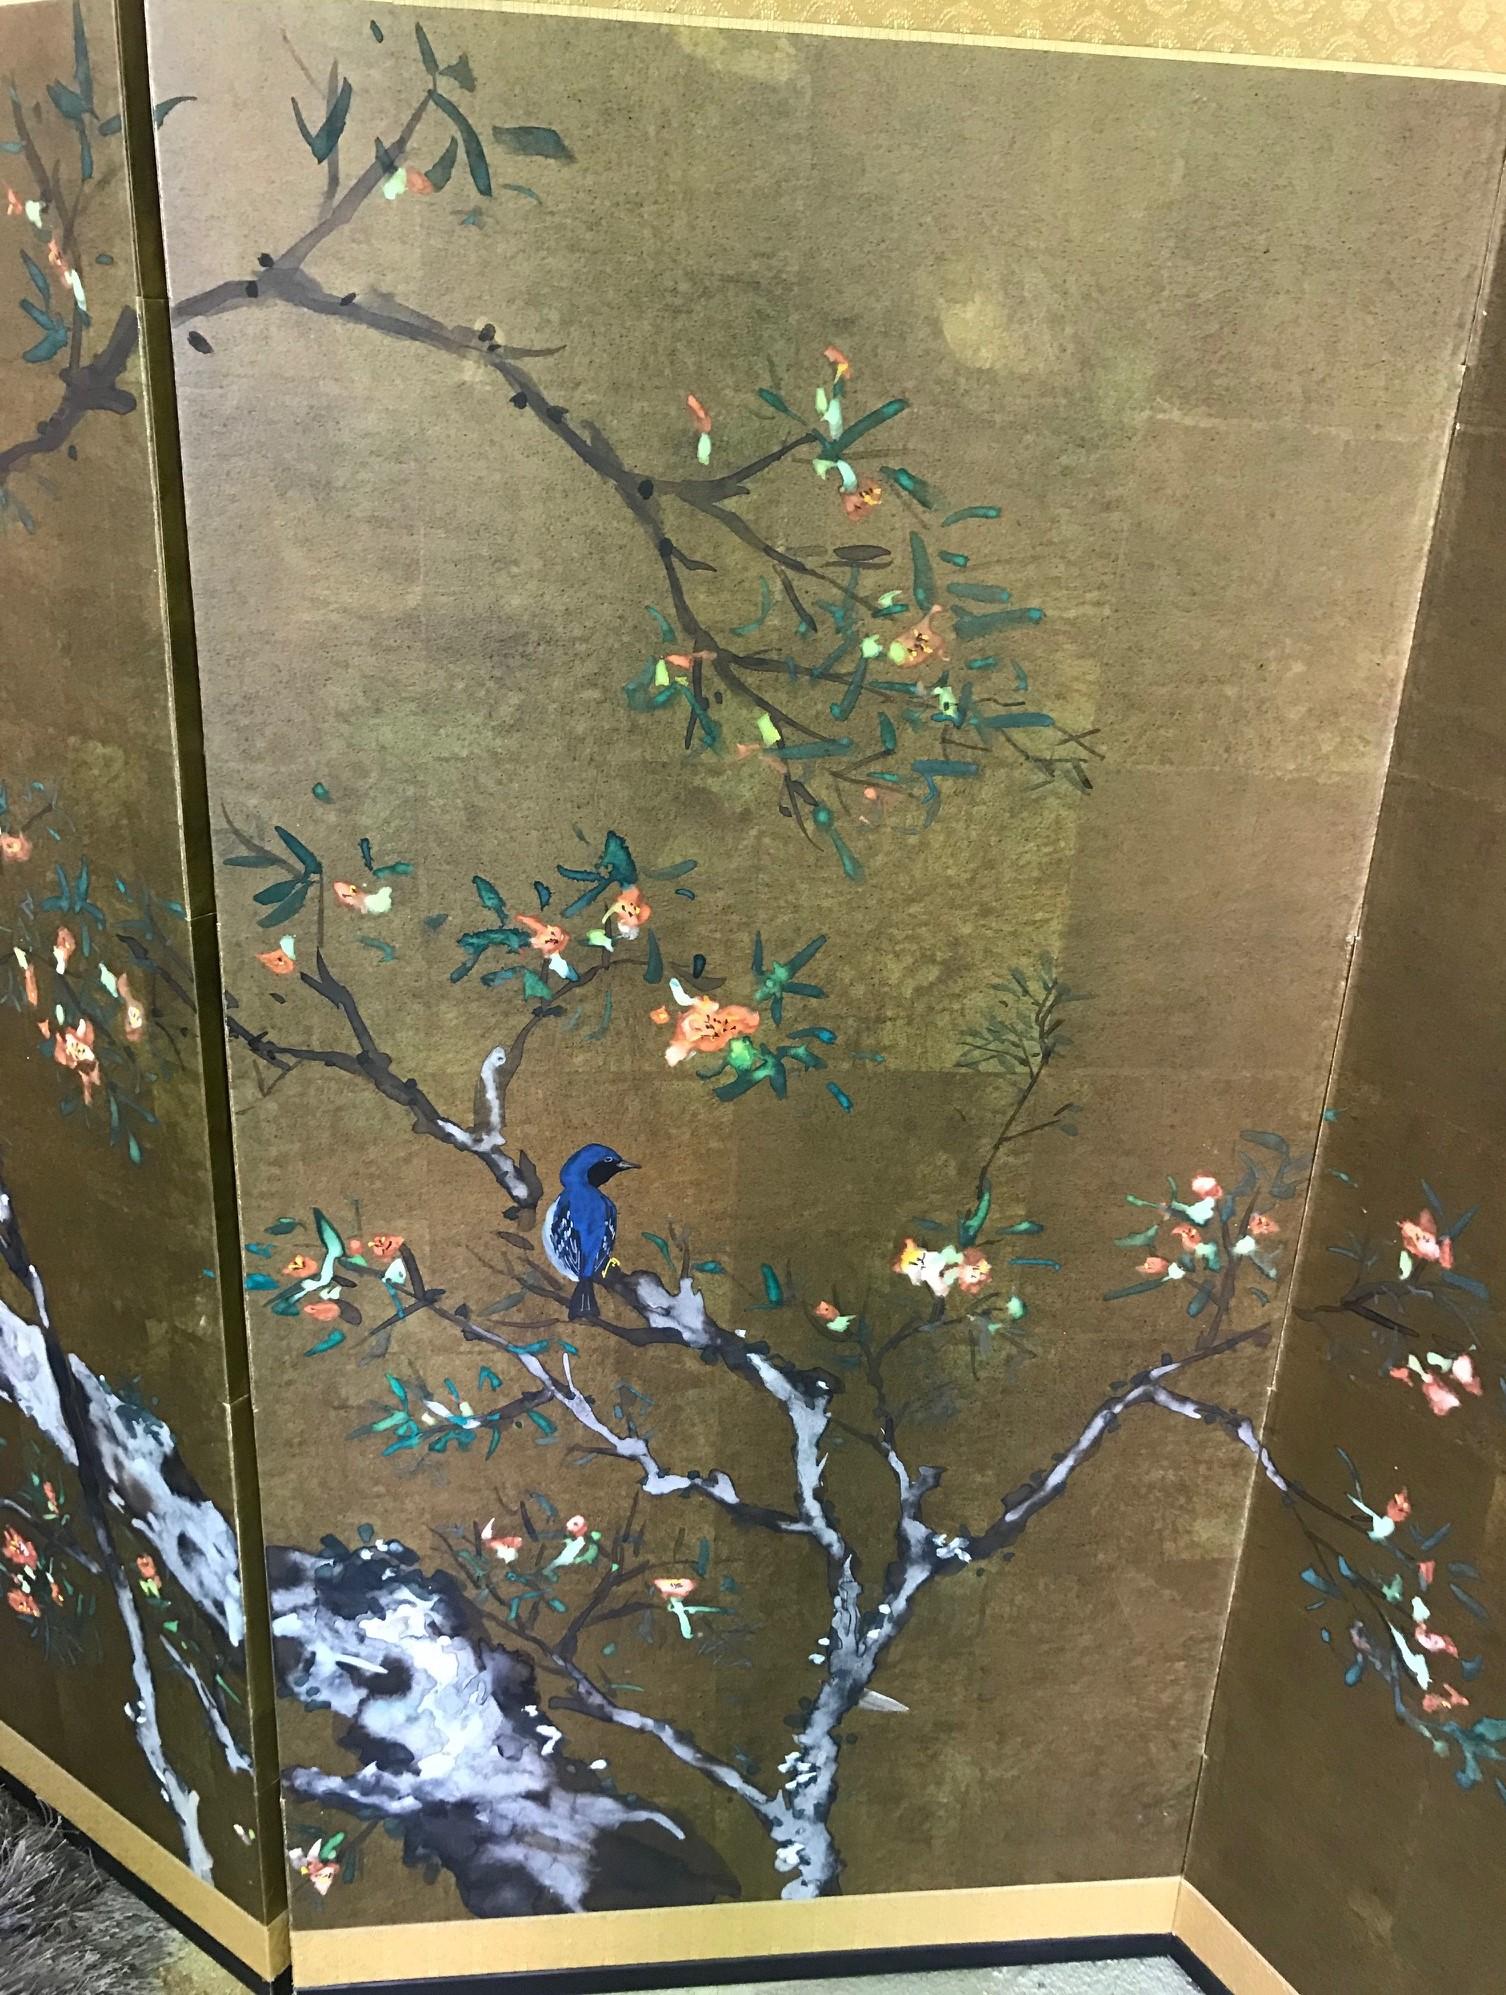 A gorgeous and whimsical four-panel Japanese Byobu folding screen depicting birds playing in a blossoming tree. The rich colors, deep gold leaf and beautiful hand painted detail really make this an attractive and unique work.

Original decorative